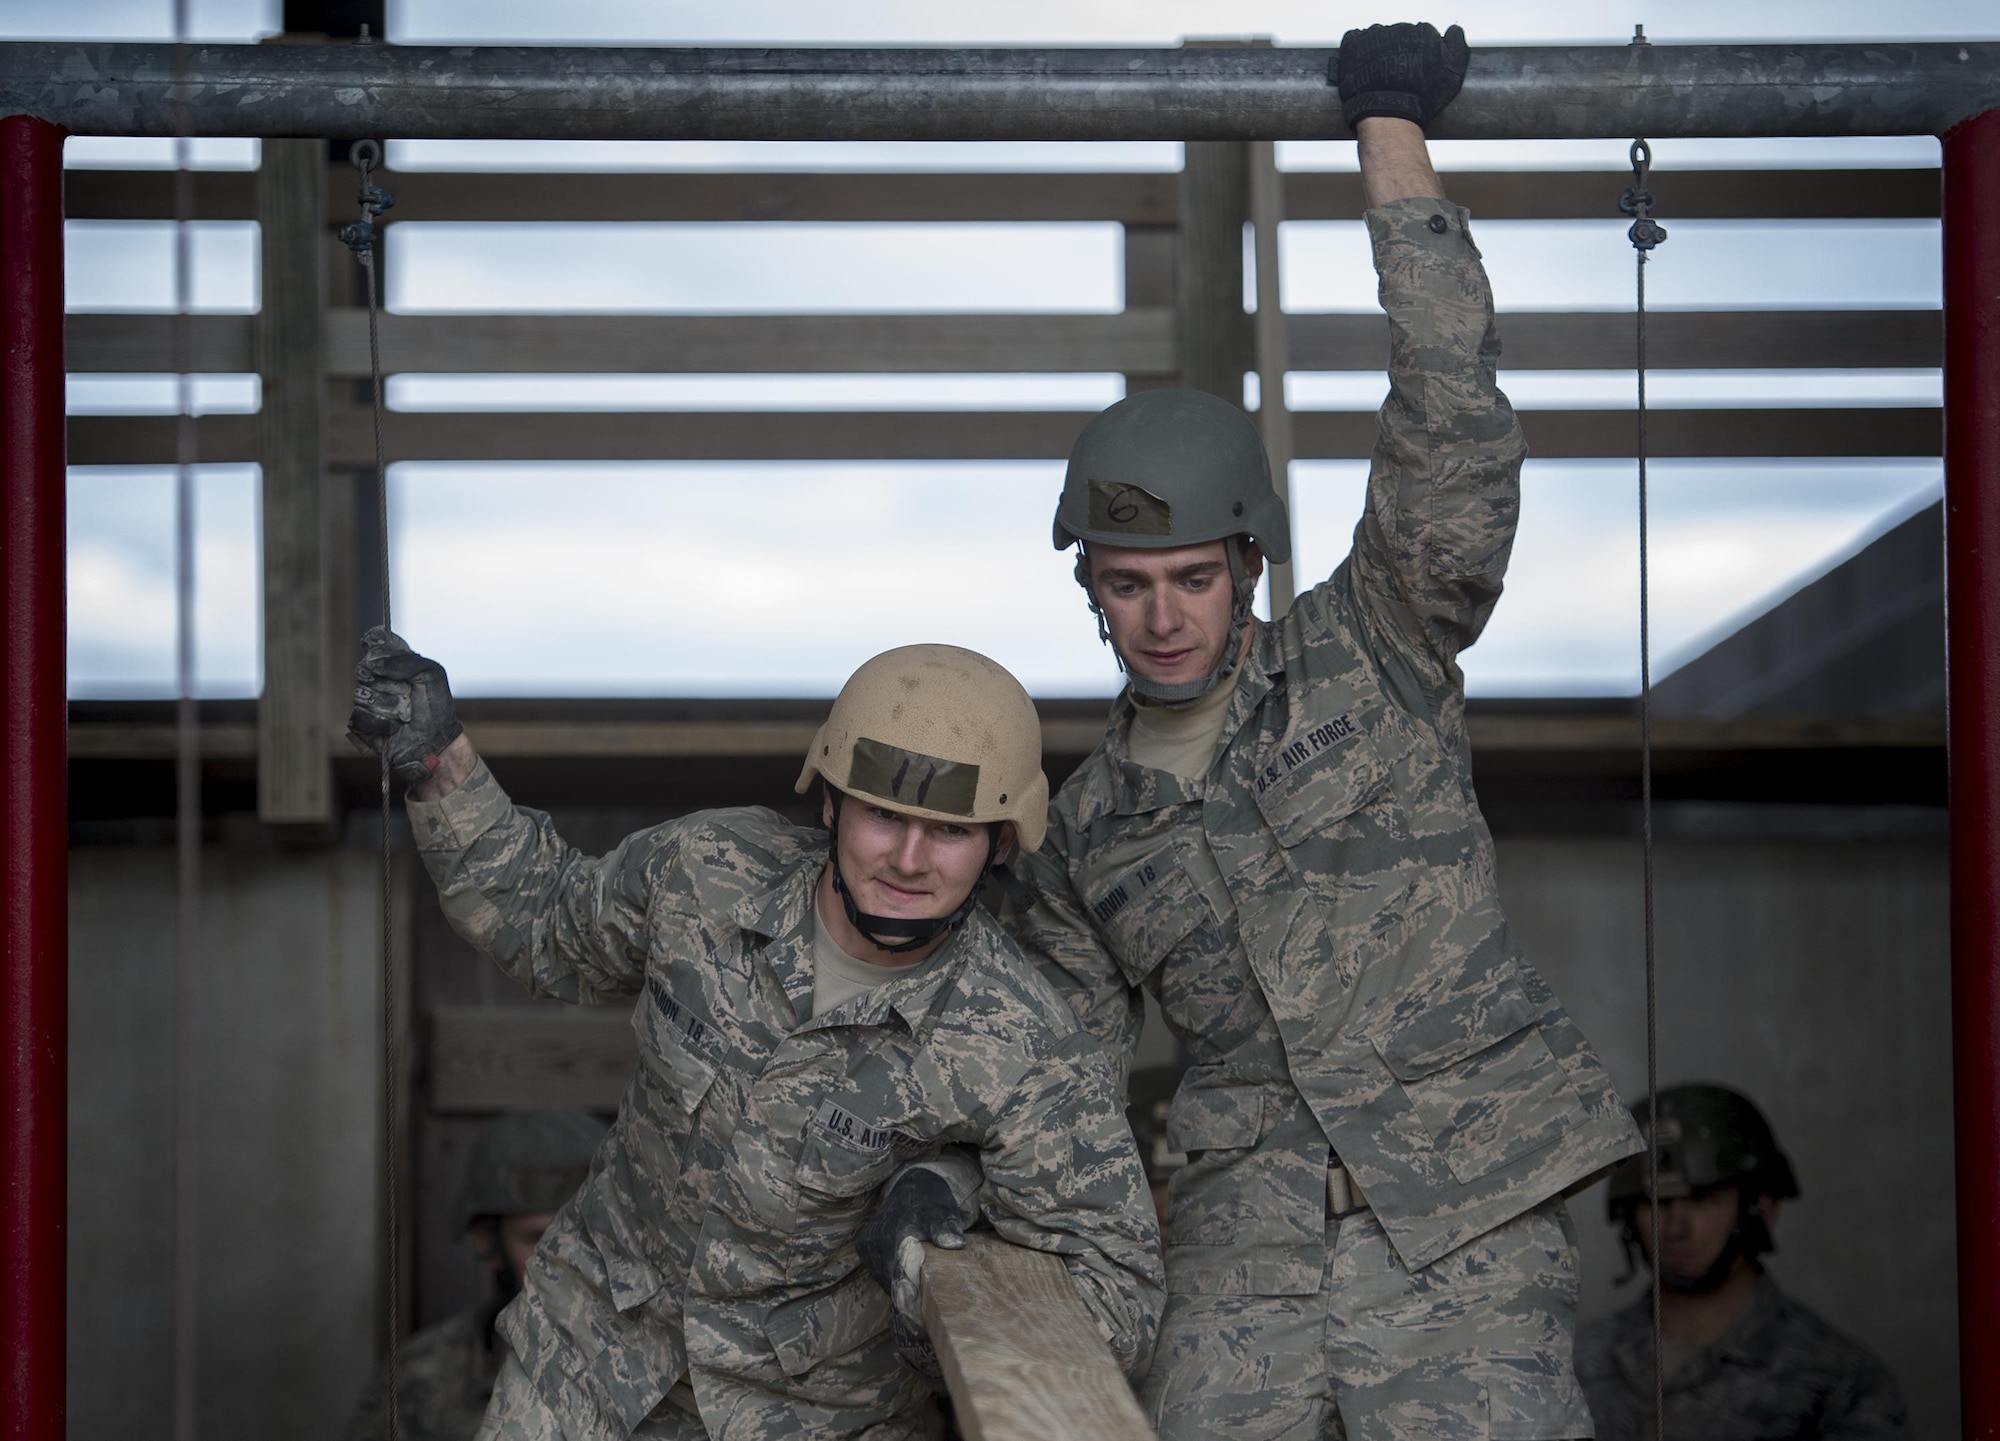 U.S. Air Force Academy cadets participate in a skills building task during the Air Liaison Officer Aptitude Assessment, Feb. 14, at Camp Bullis, Texas. The cadets were forced to use critical thinking skills to complete tasked obstacles as a team. (U.S. Air Force photo by Tech. Sgt. Zachary Wolf)